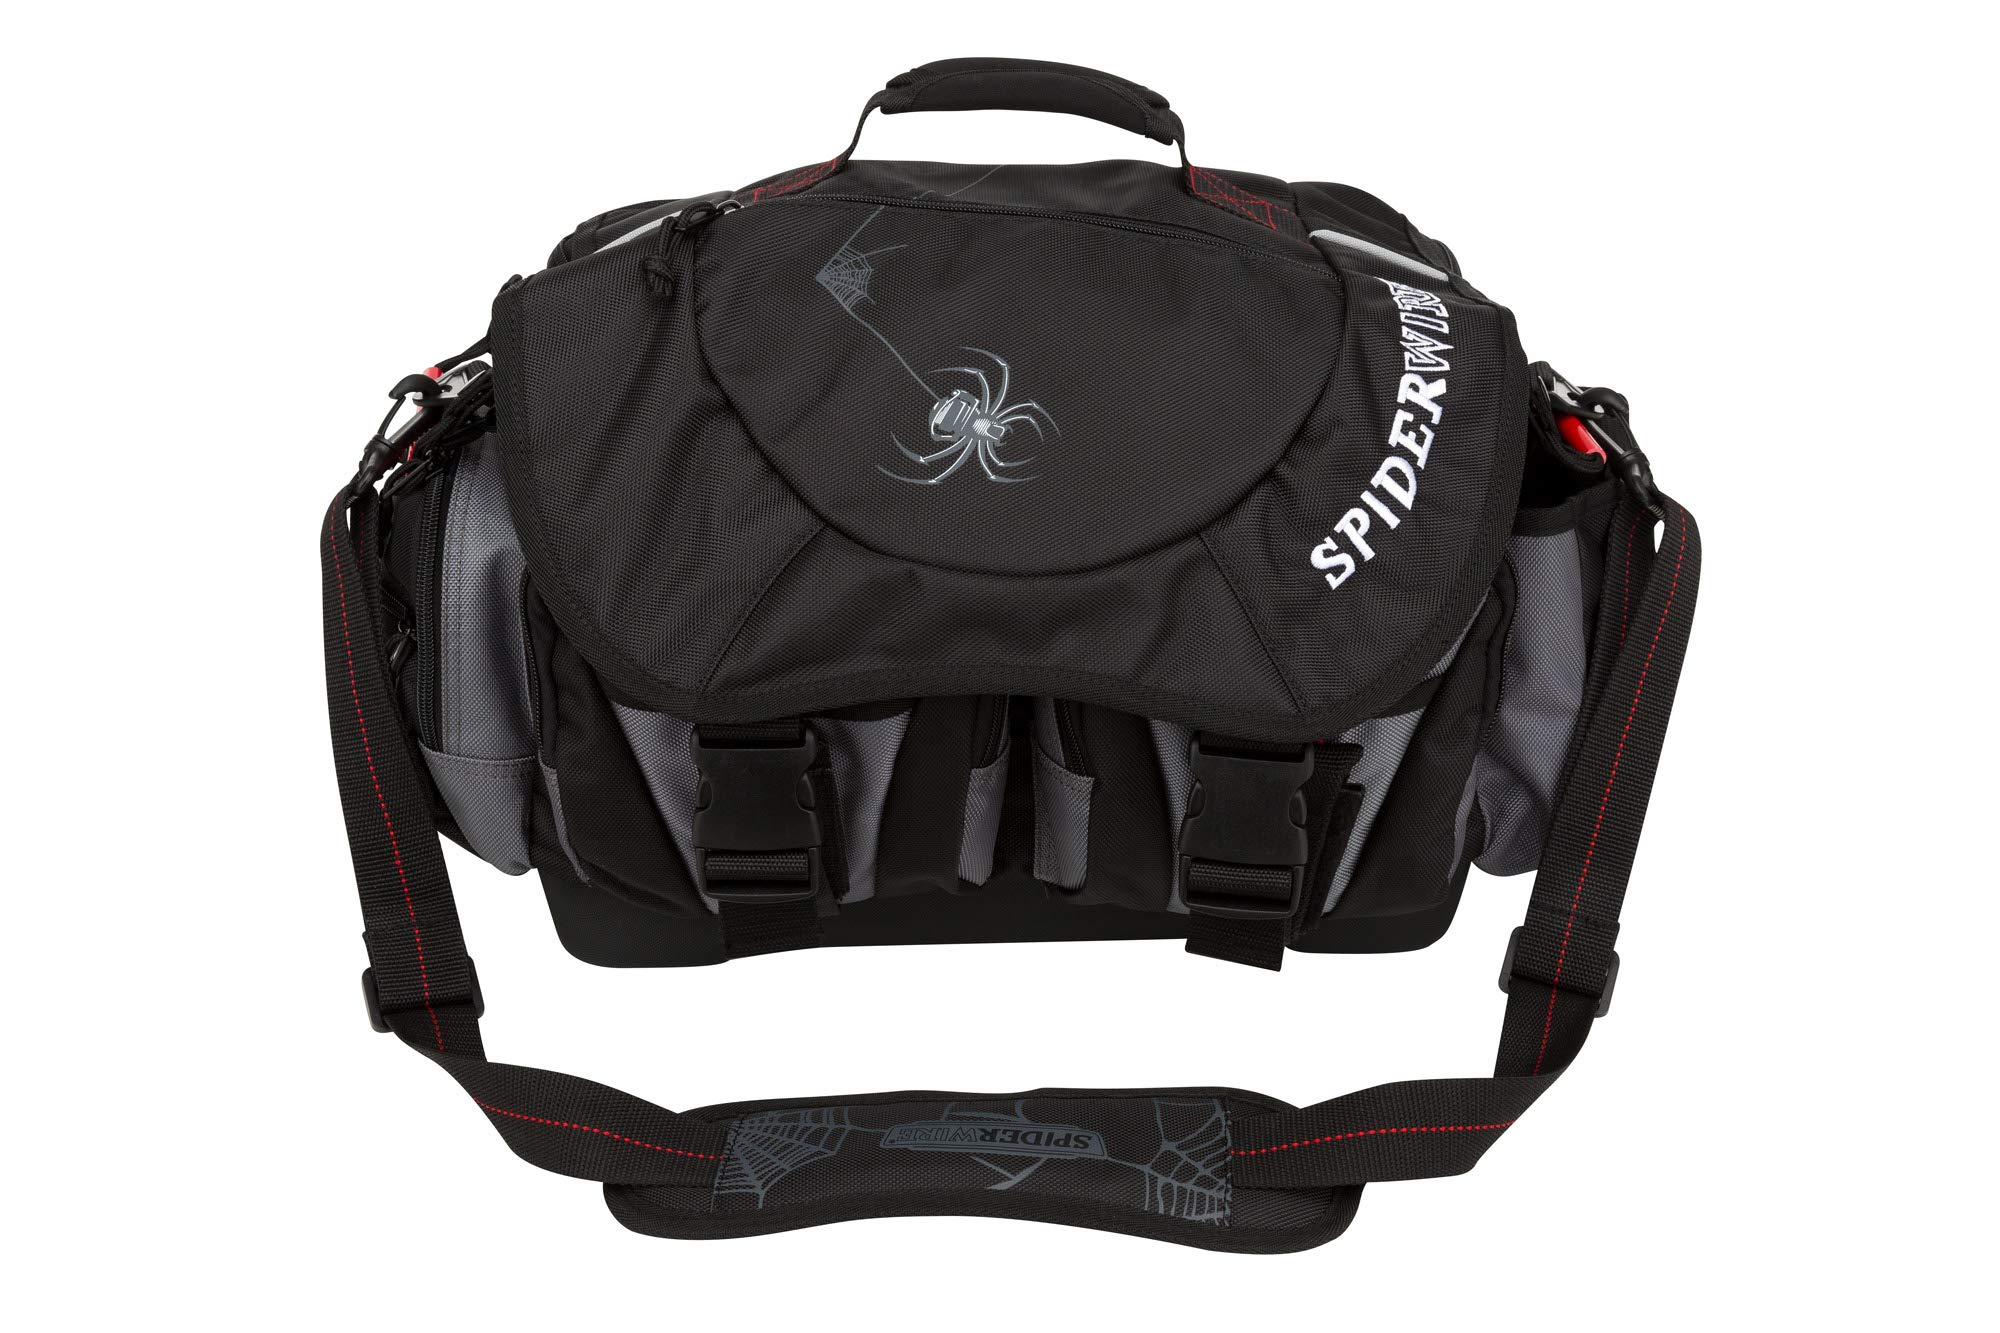 Spiderwire Wolf Tackle Bag, 38.8-Liter - image 1 of 9